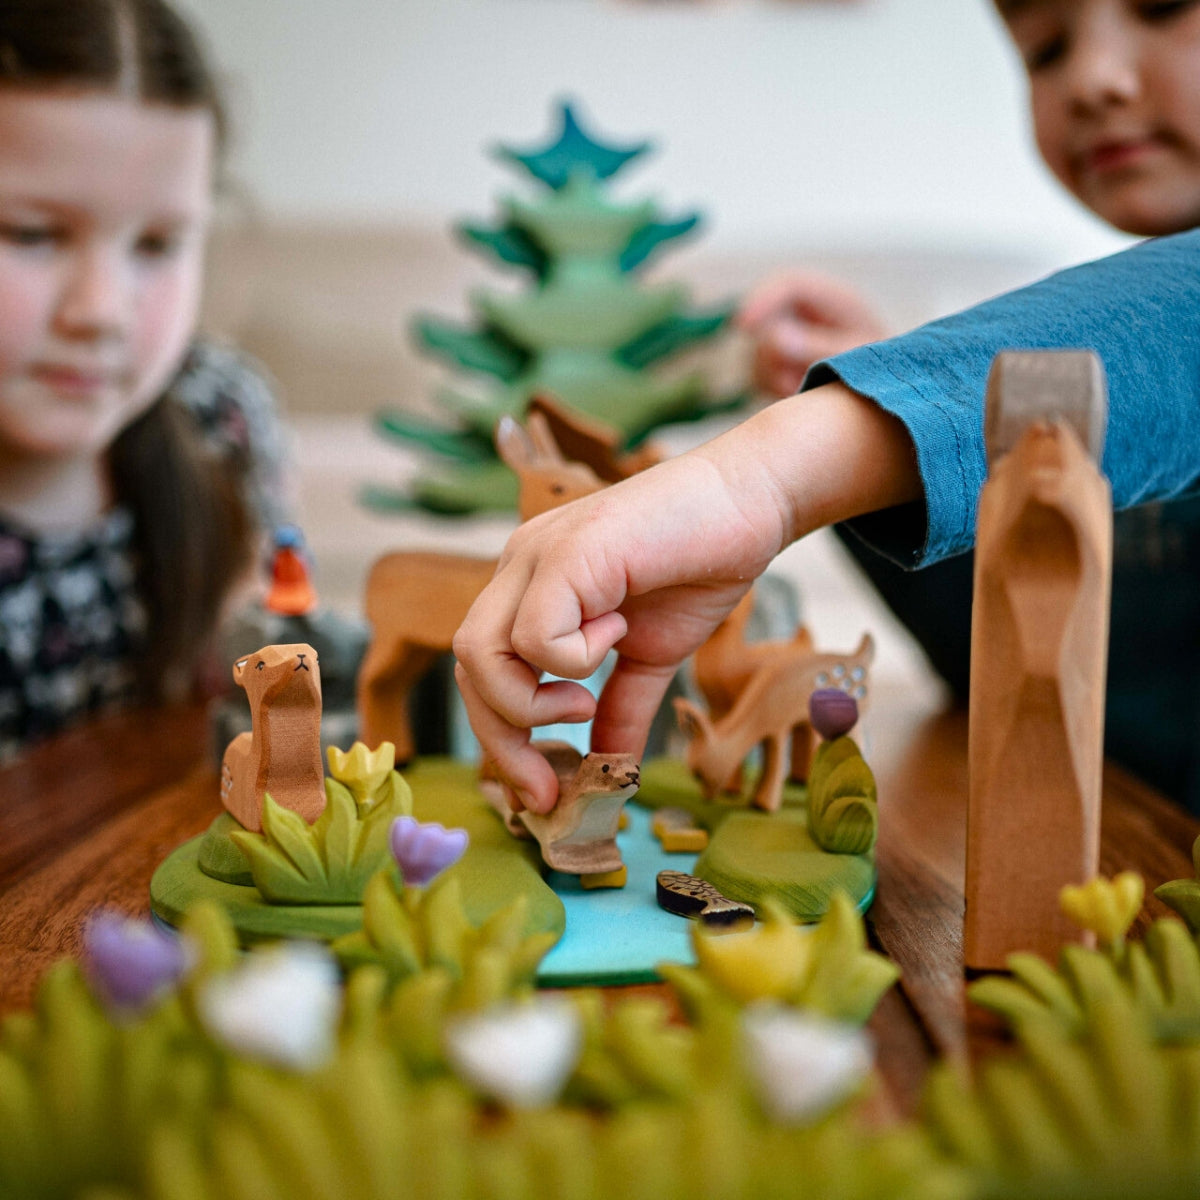 Children engaged in imaginative small world play - a woodland scene incorporating Bumbu handcrafted wooden animals and trees, available in Australia from Oskar's Wooden Ark